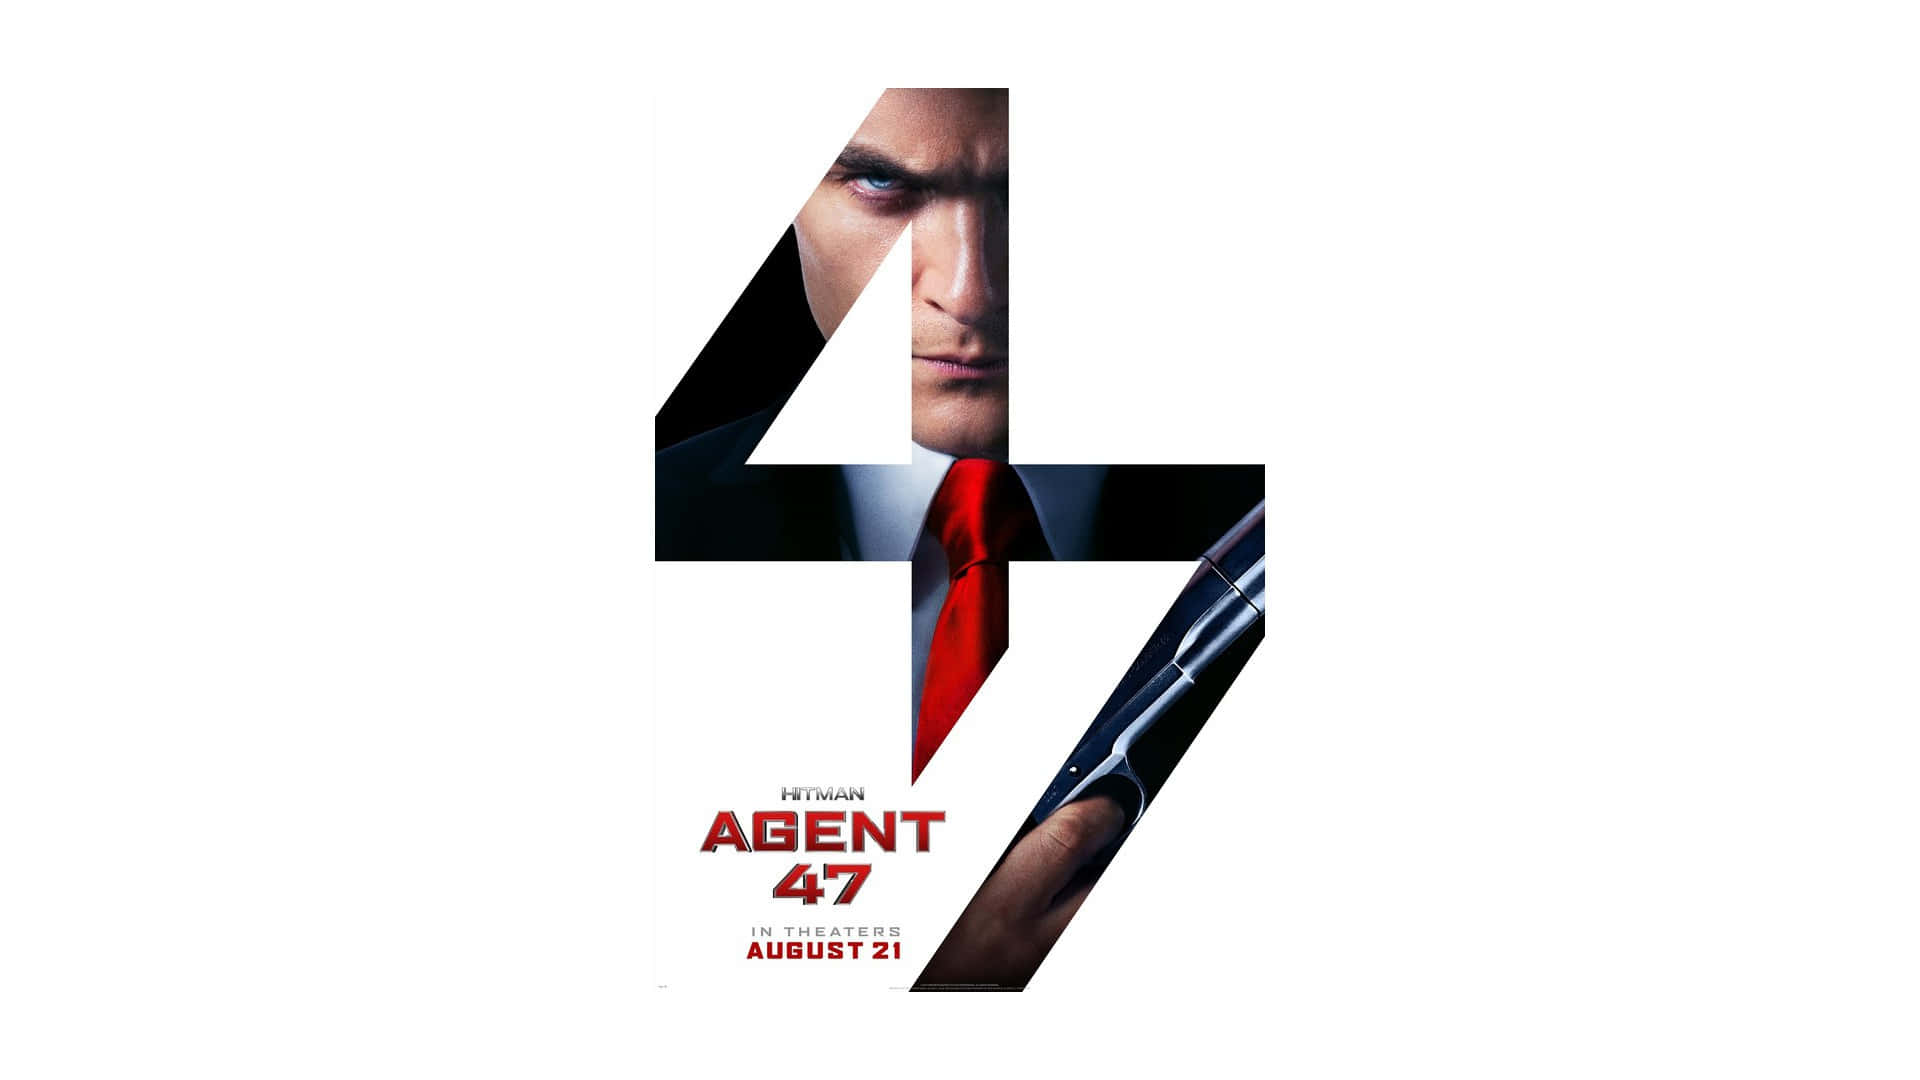 Agent 47 Poster With A Man In A Tie Wallpaper